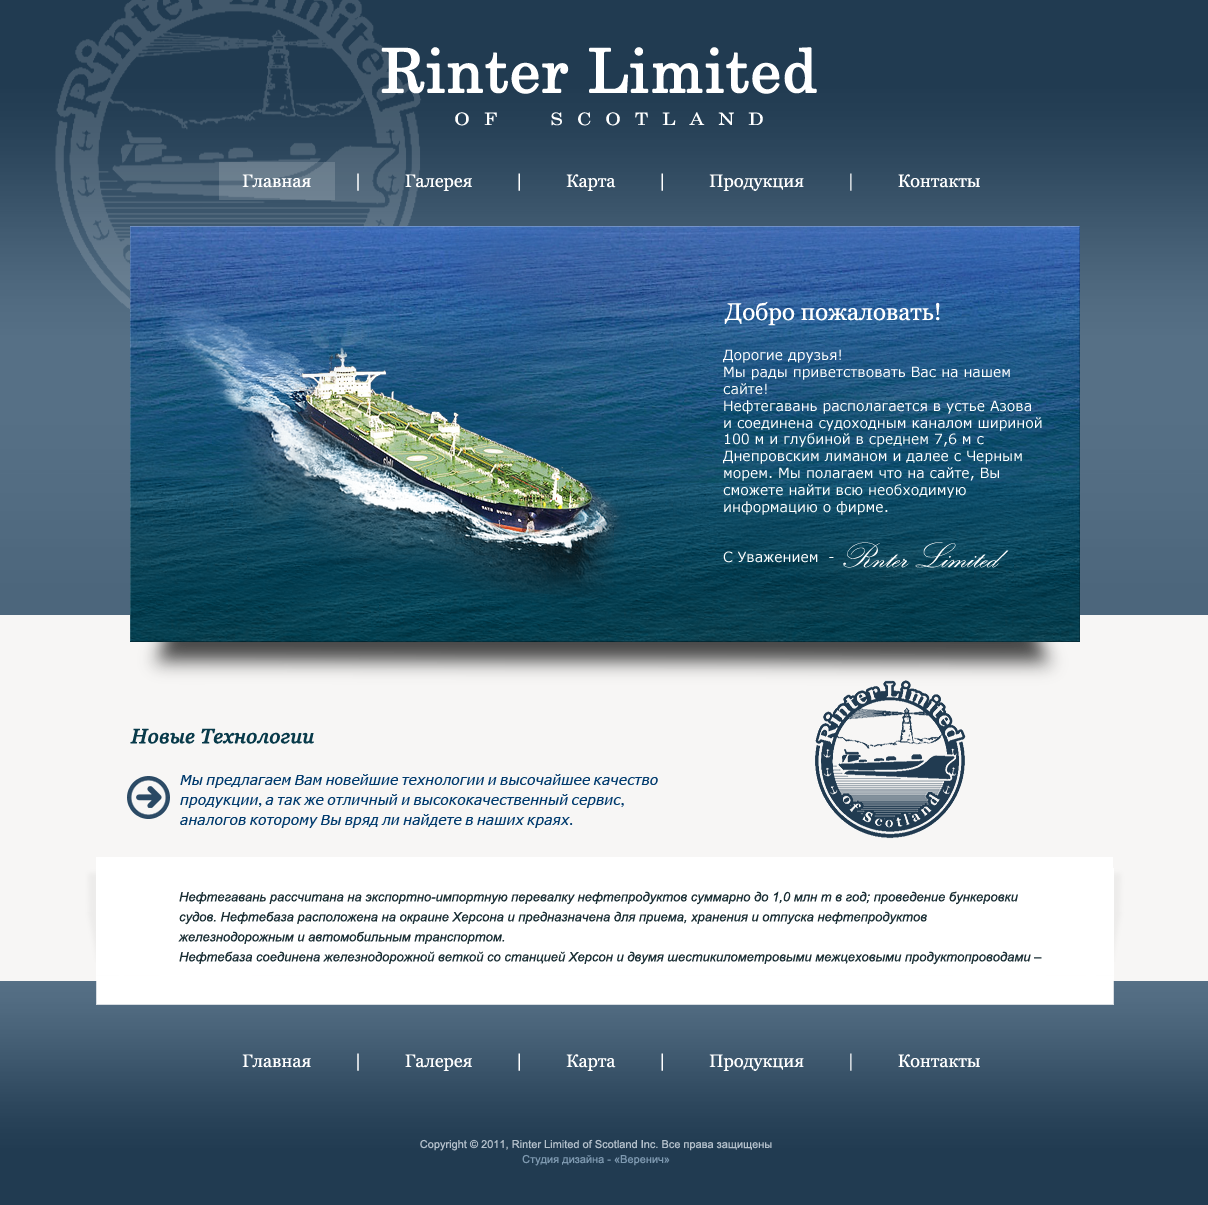 Rinter Limited of England & Wales